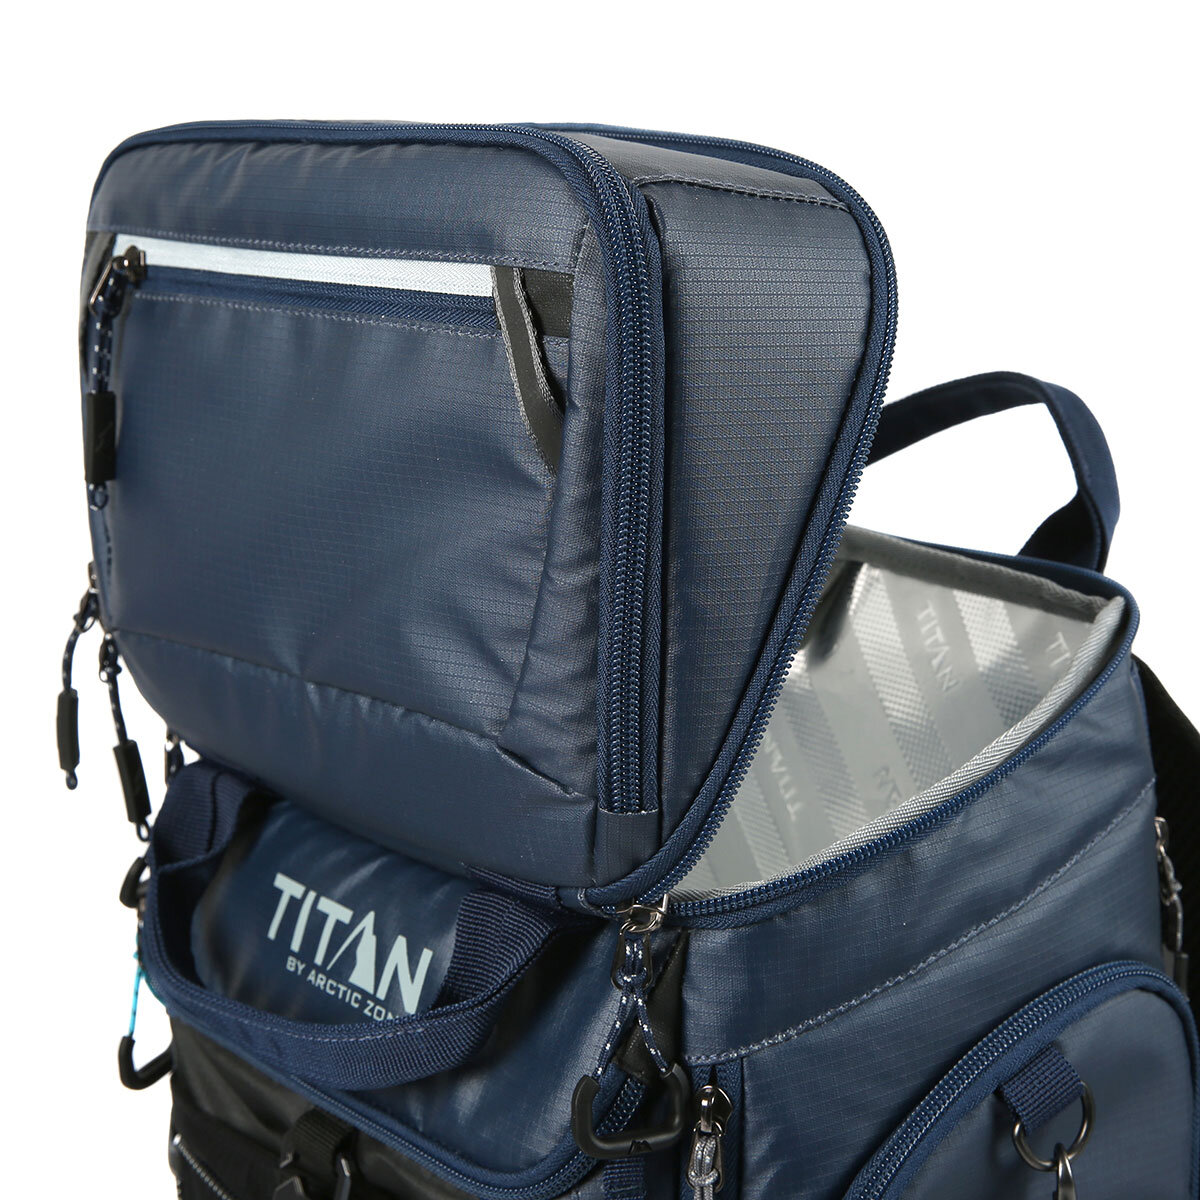 Titan 26 Can Backpack Cooler in Navy